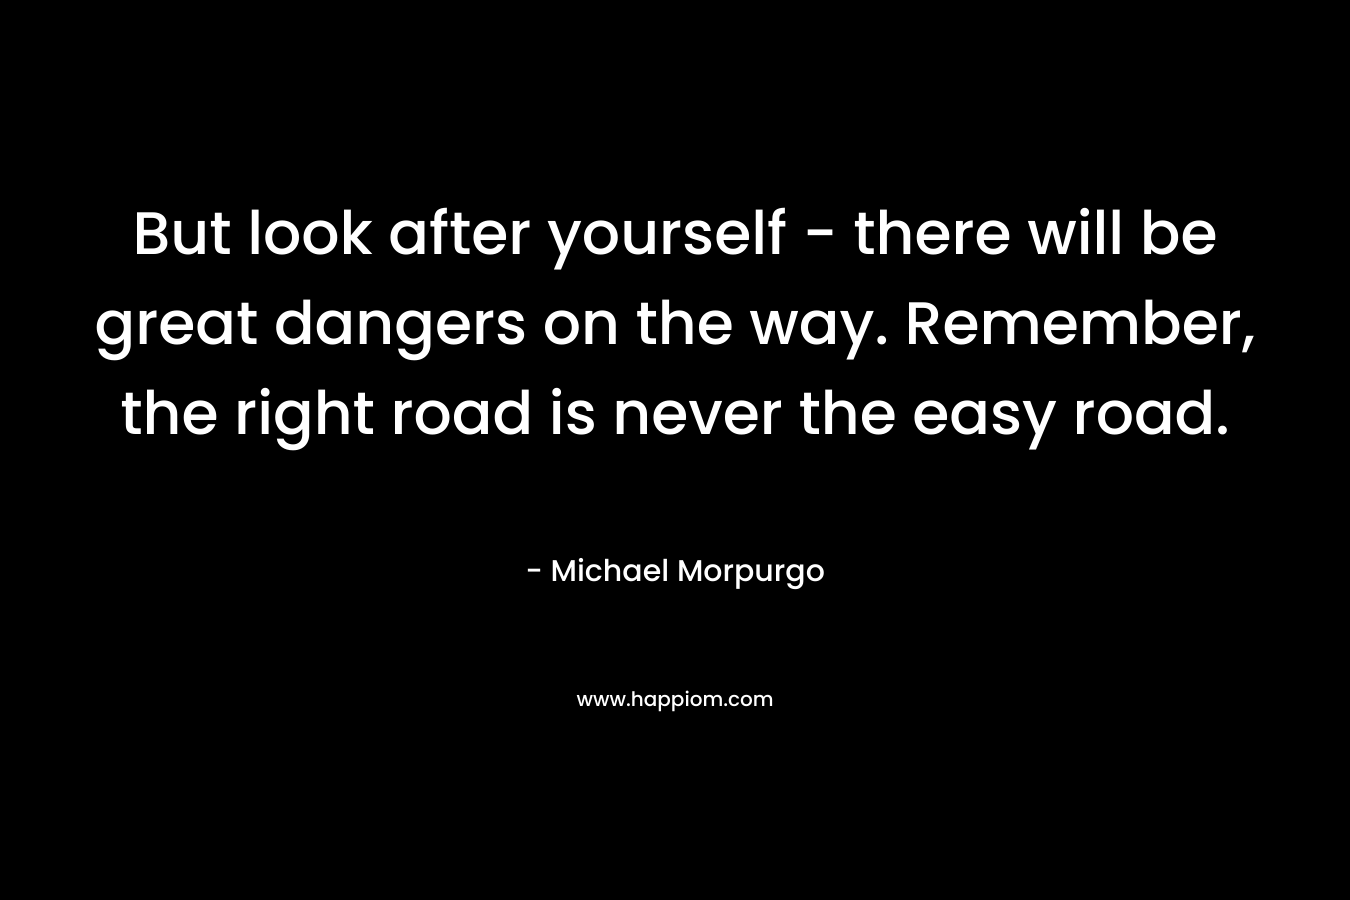 But look after yourself – there will be great dangers on the way. Remember, the right road is never the easy road. – Michael Morpurgo